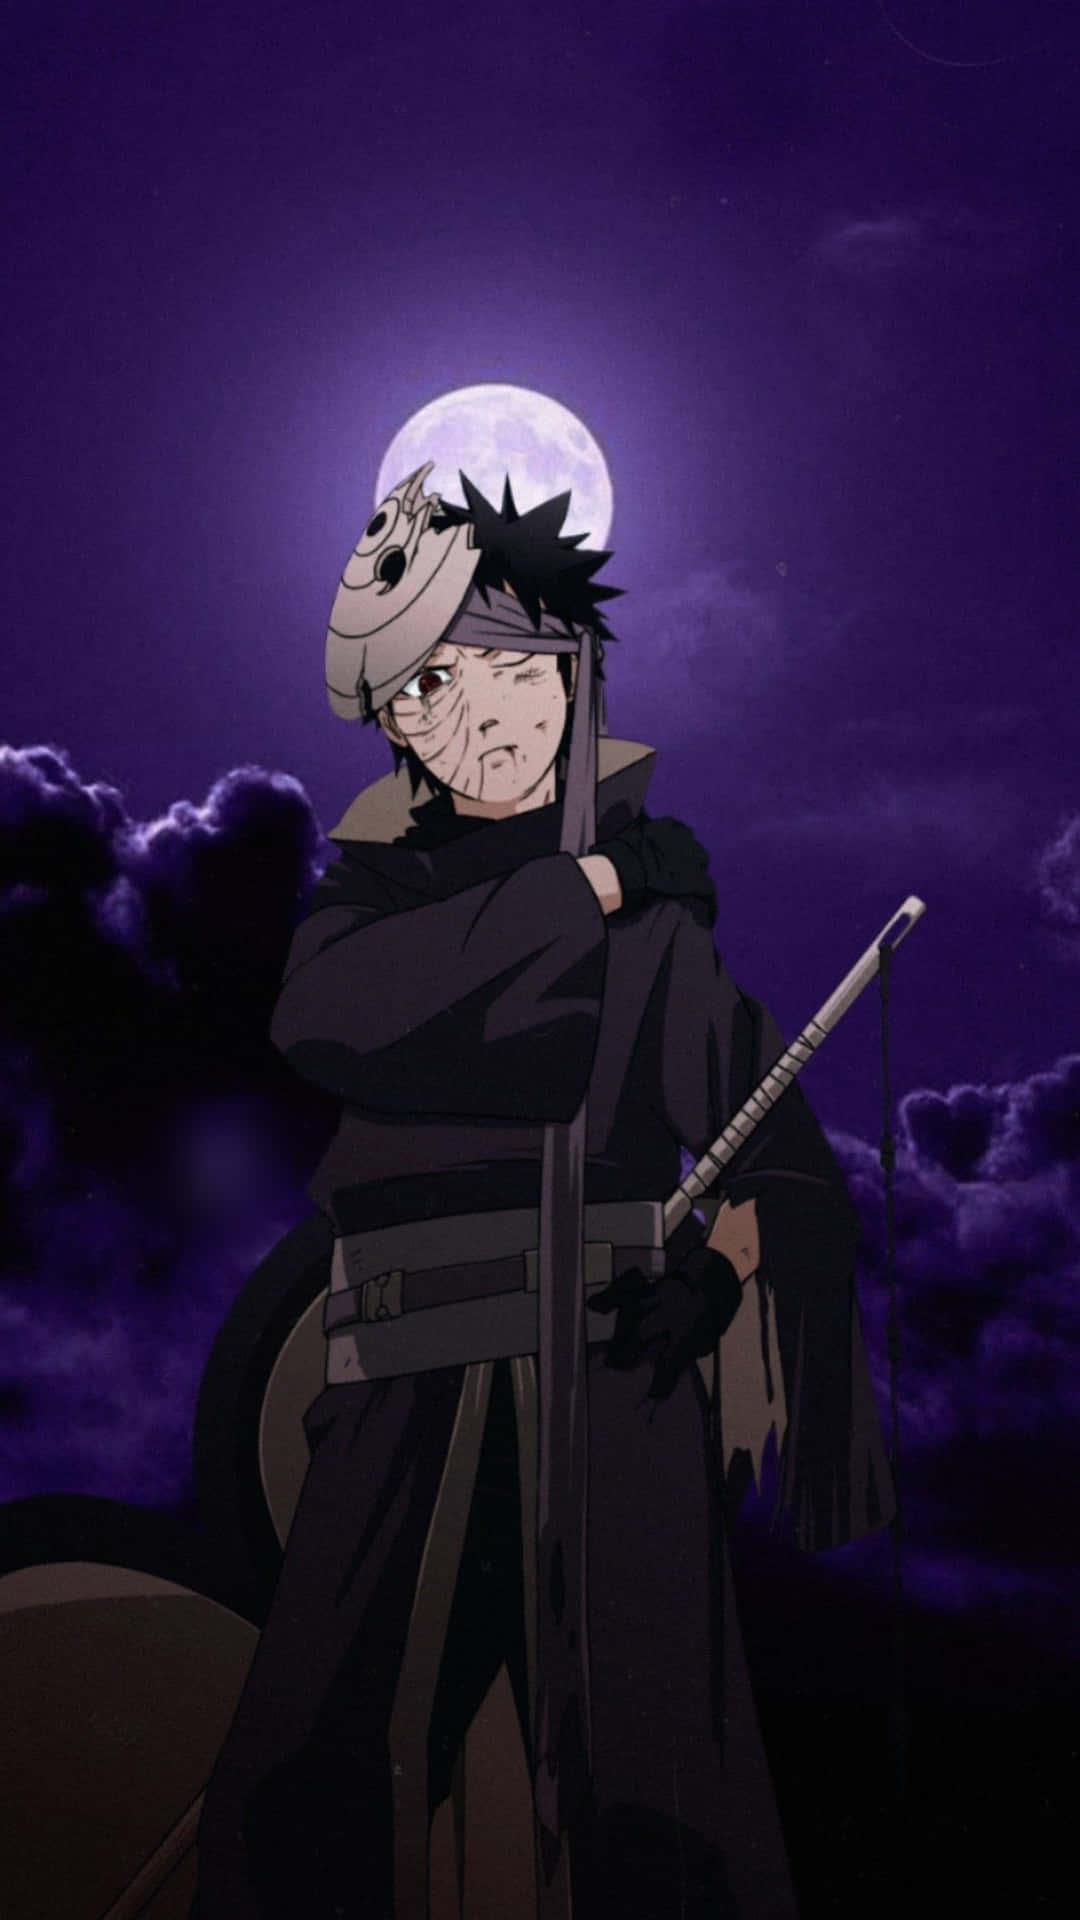 Download Let Obito Uchiha lead the way and your dreams come true! Wallpaper